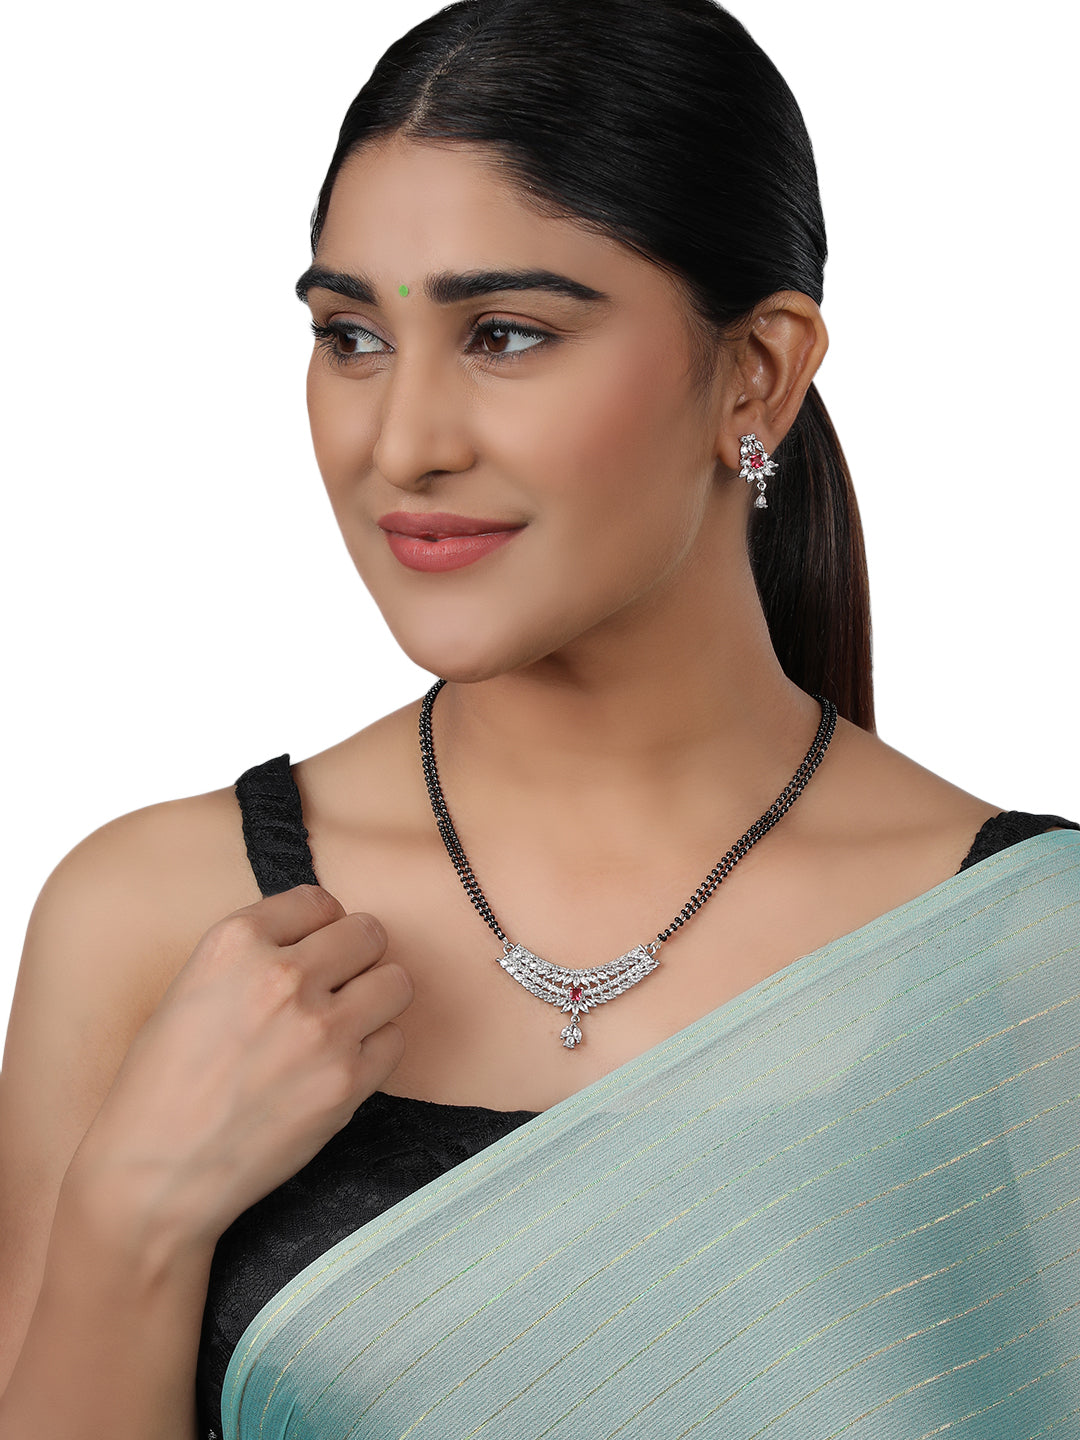 Rhodium-Plated & White AD Stone-Studded Mangalsutra With Earrings